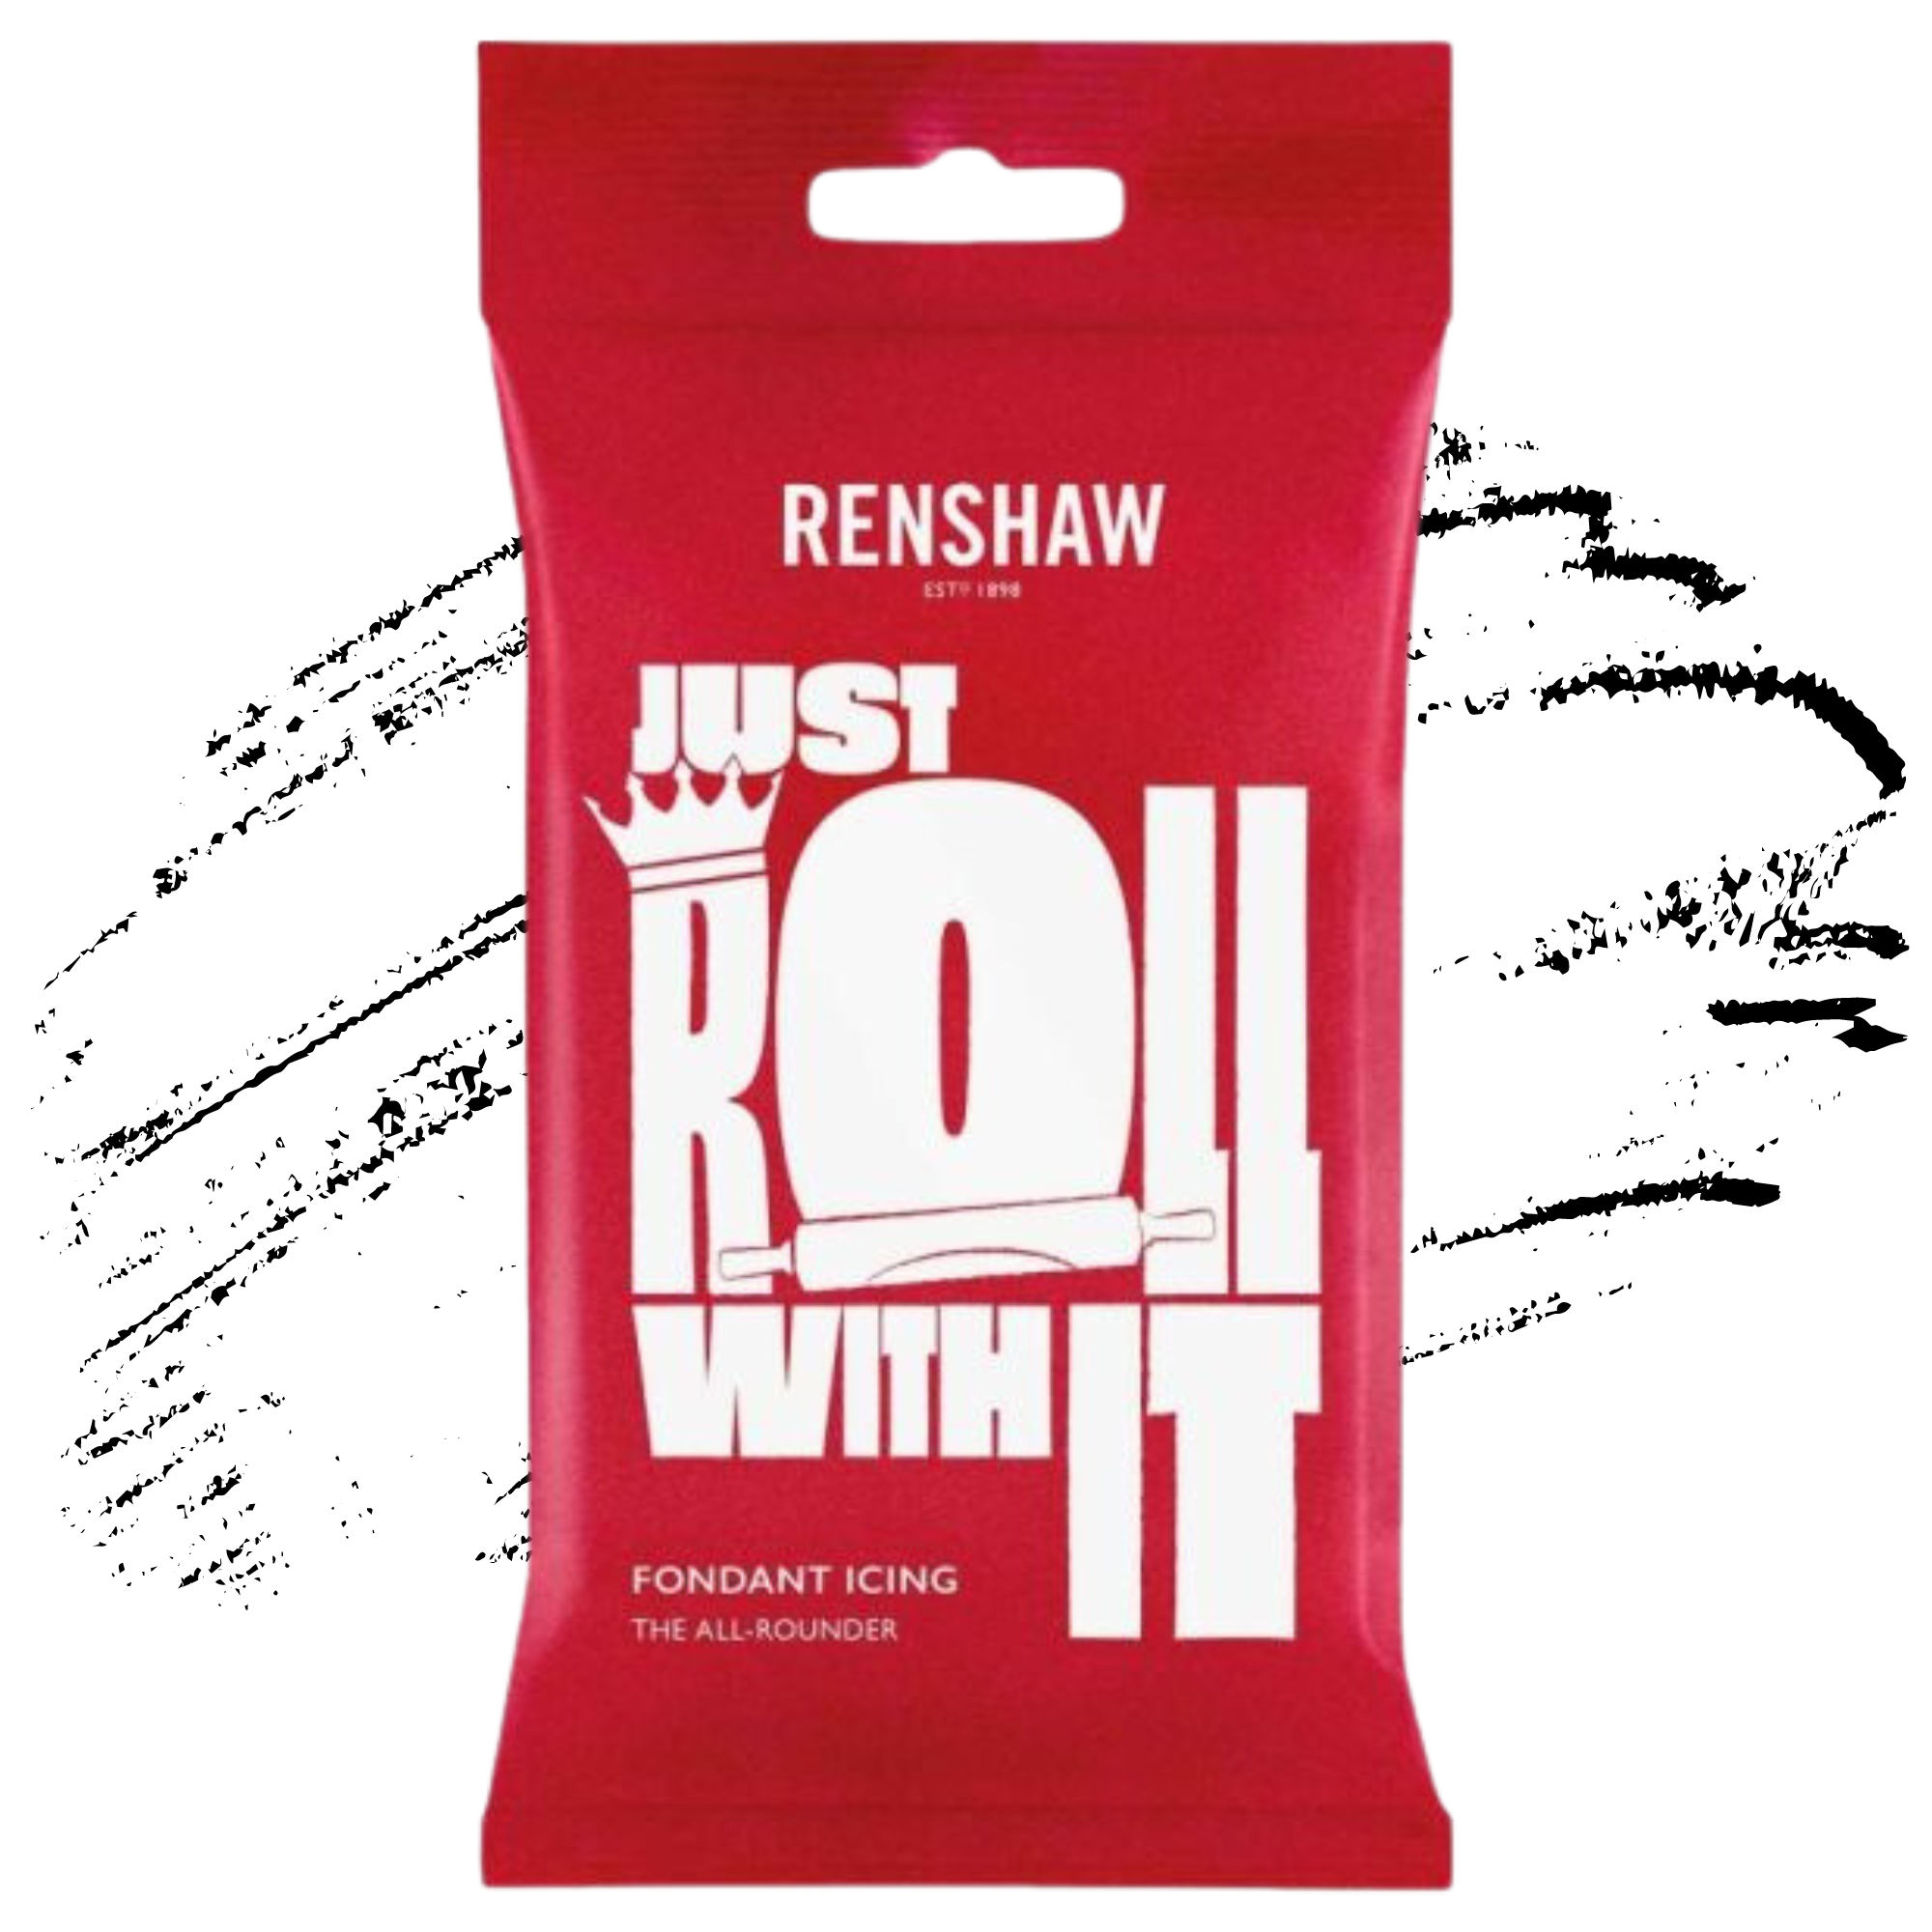 Renshaw Professional Sugar Paste Ready to Roll Fondant Just Roll with it Icing - White - 250g